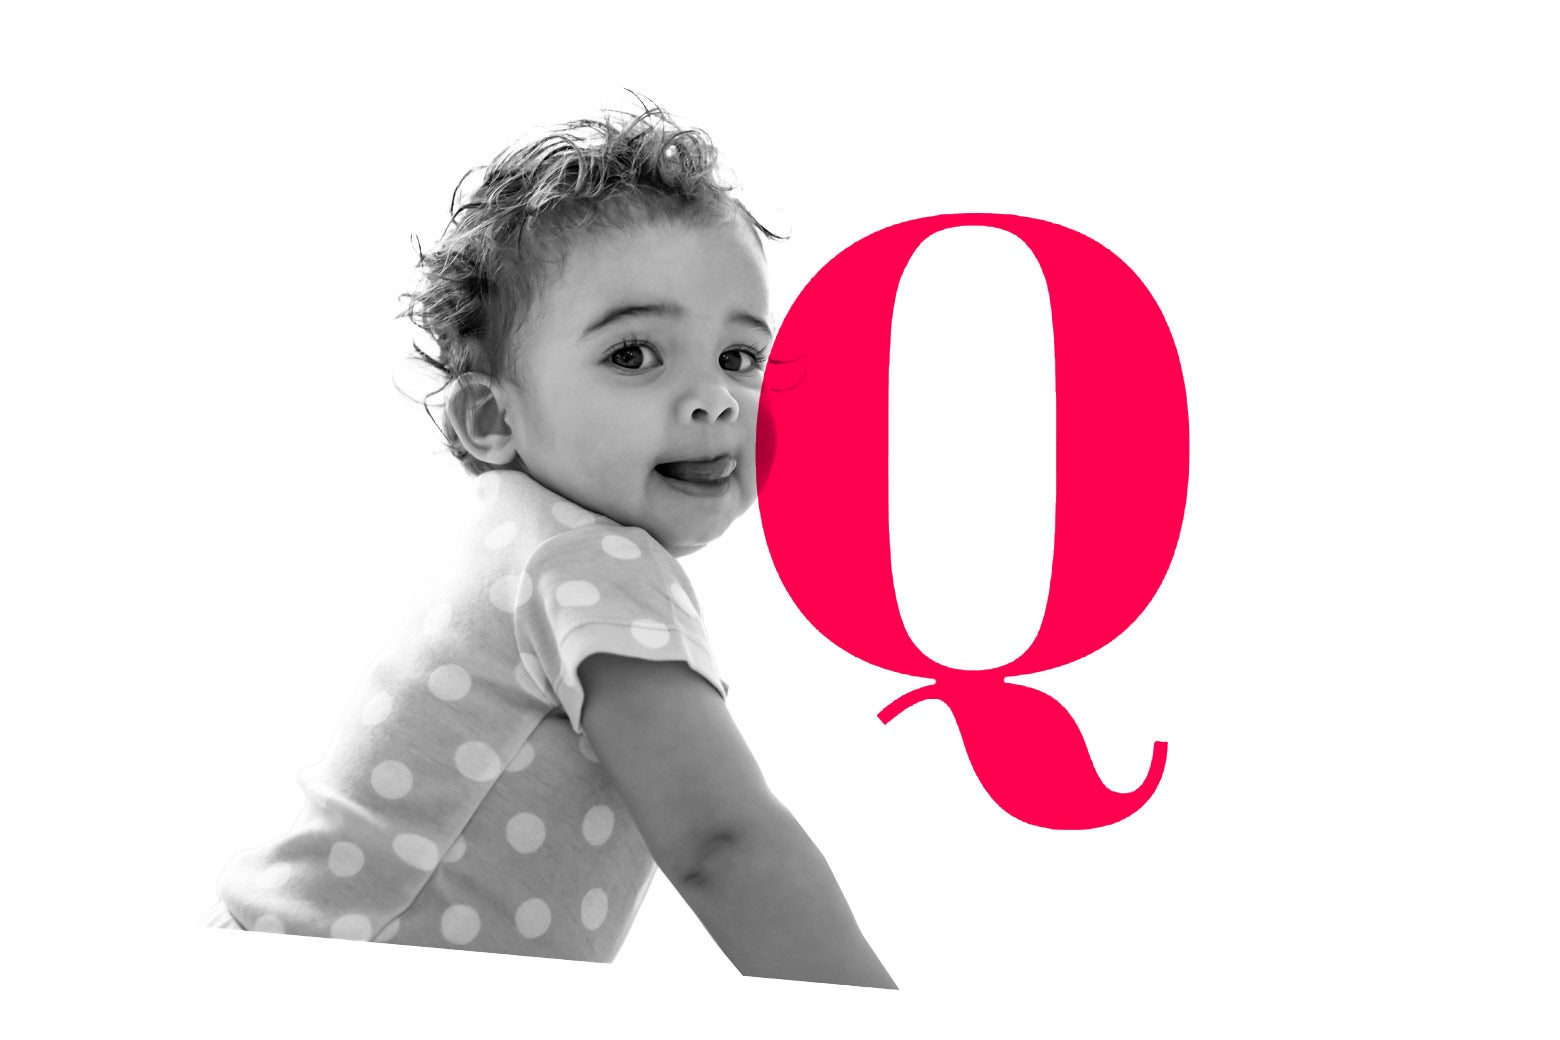 A baby and a letter Q.